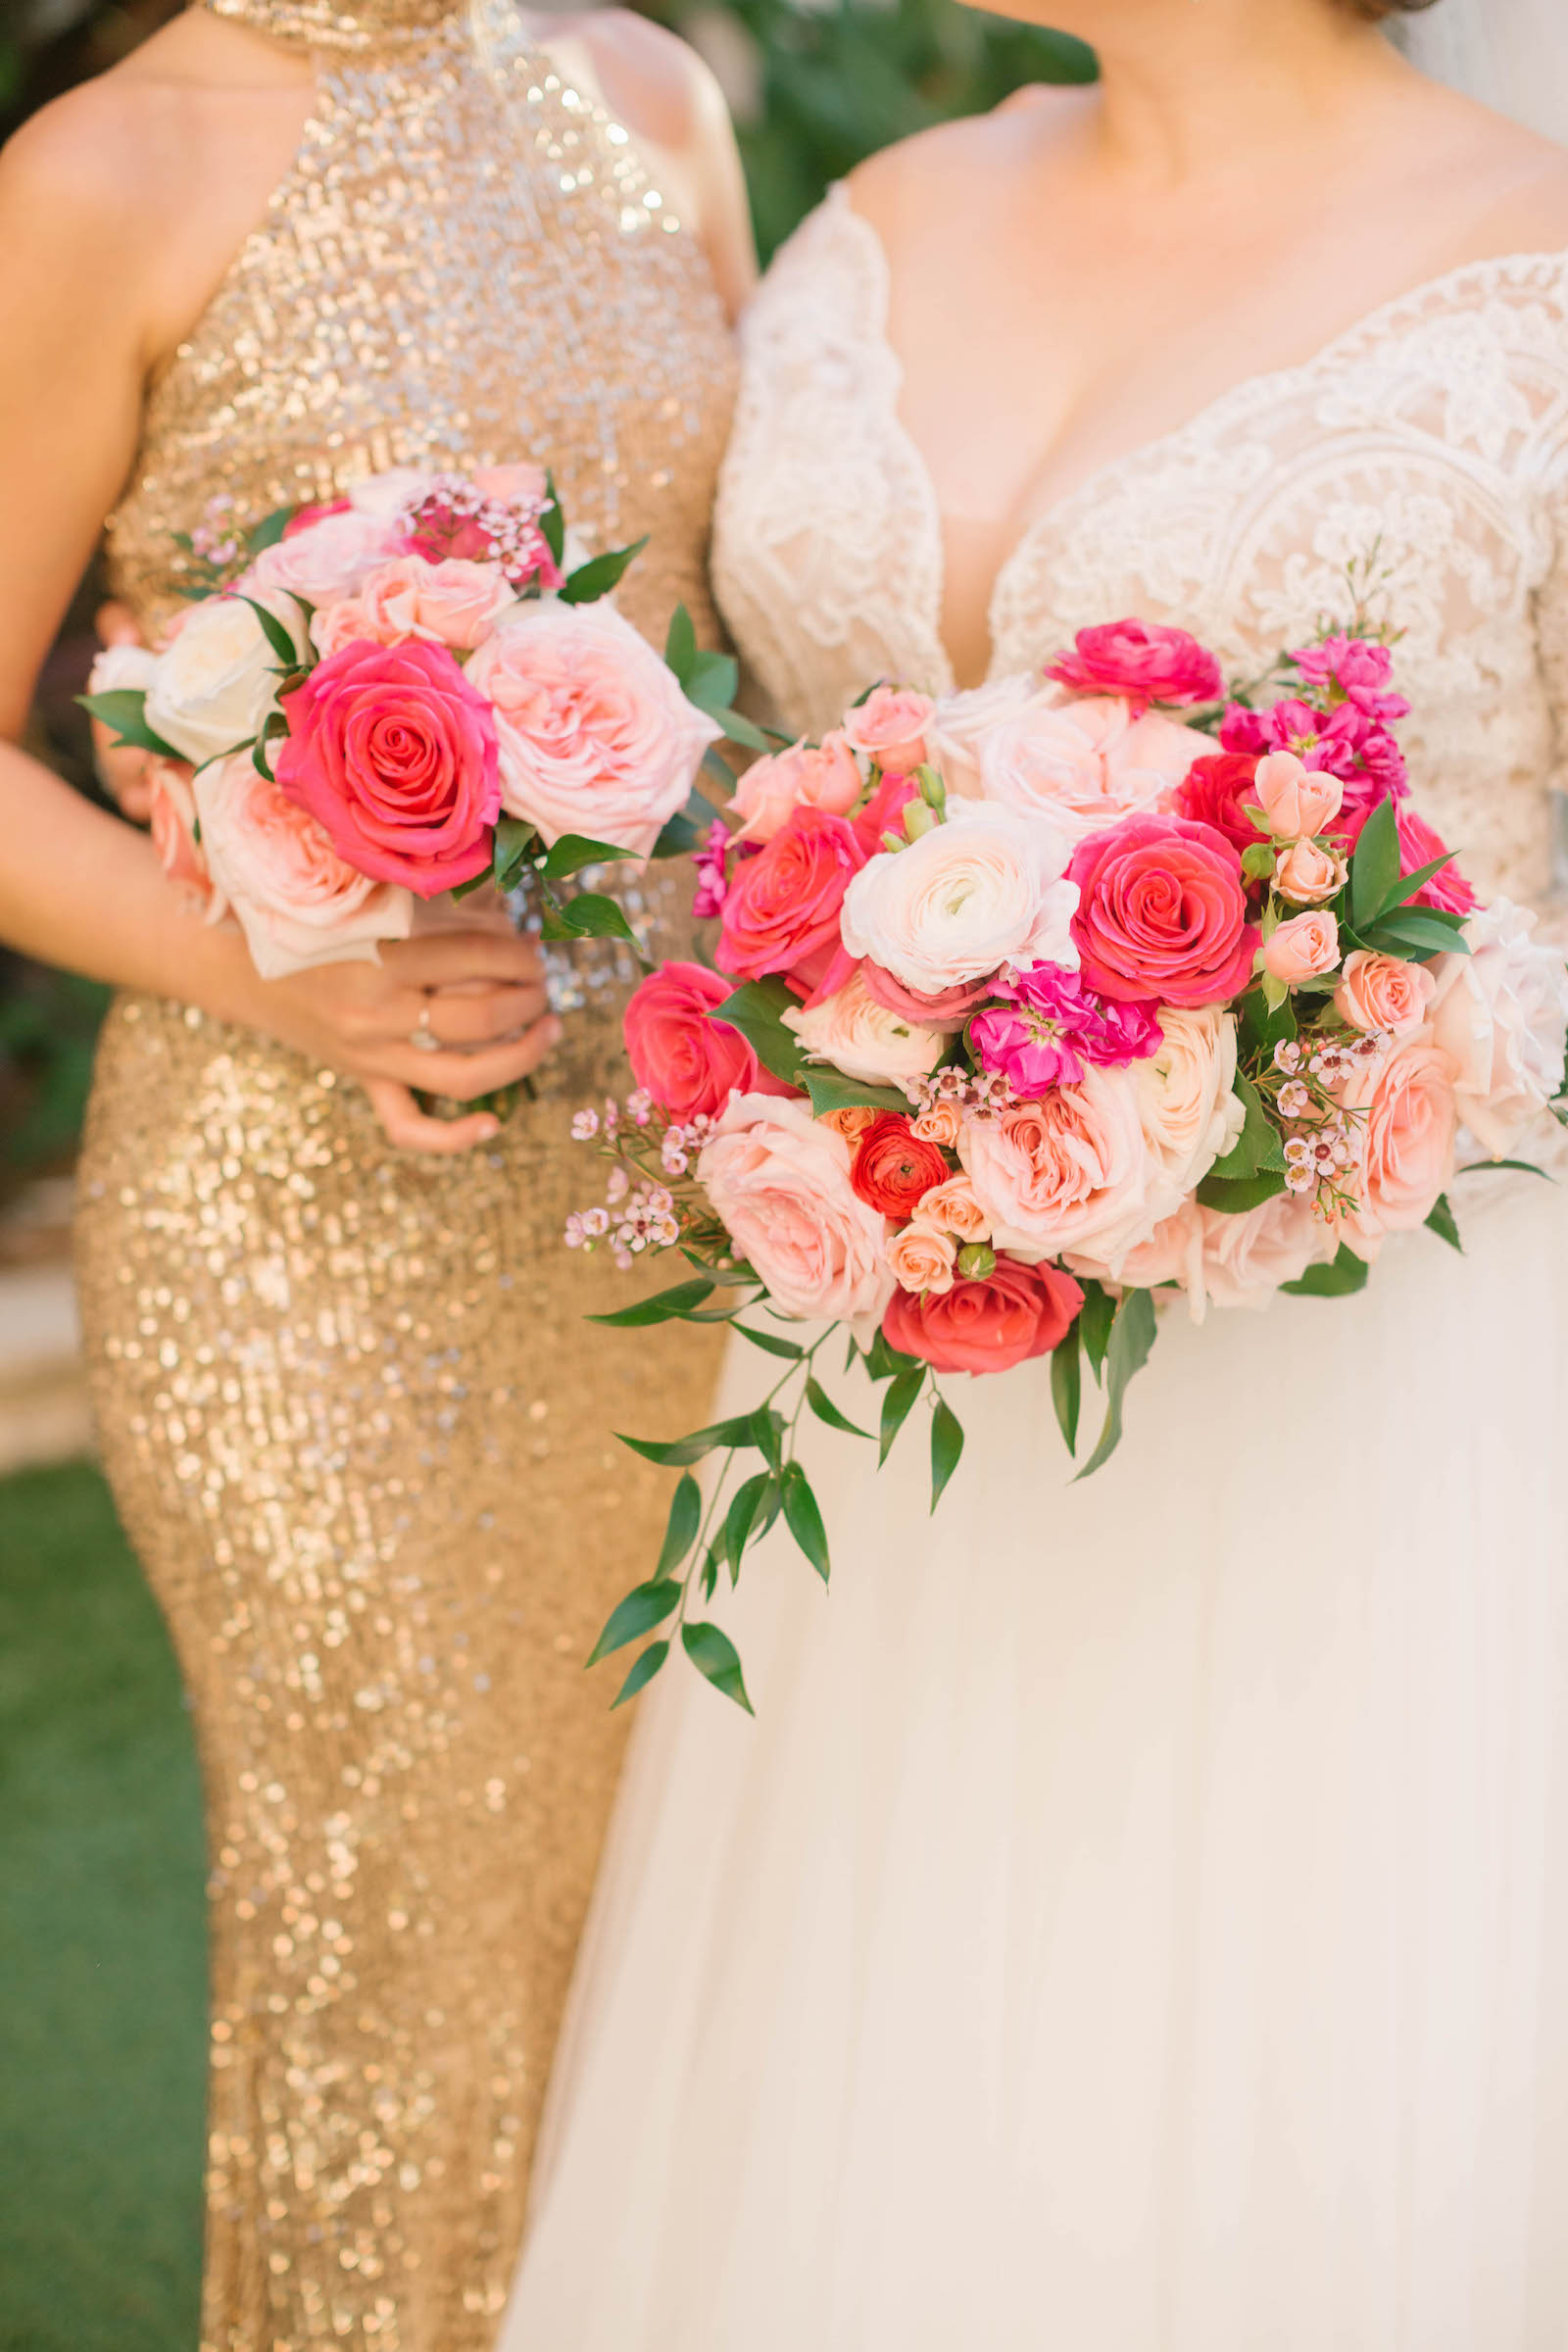 Tampa Bay Bride in Lace and Illusion Long Sleeve Wedding Dress Holding Vibrant Pink, Blush Roses Floral Bouquet with Bridesmaid in Gold Sequin Dress | Tampa Bay Wedding Florist Bruce Wayne Florals